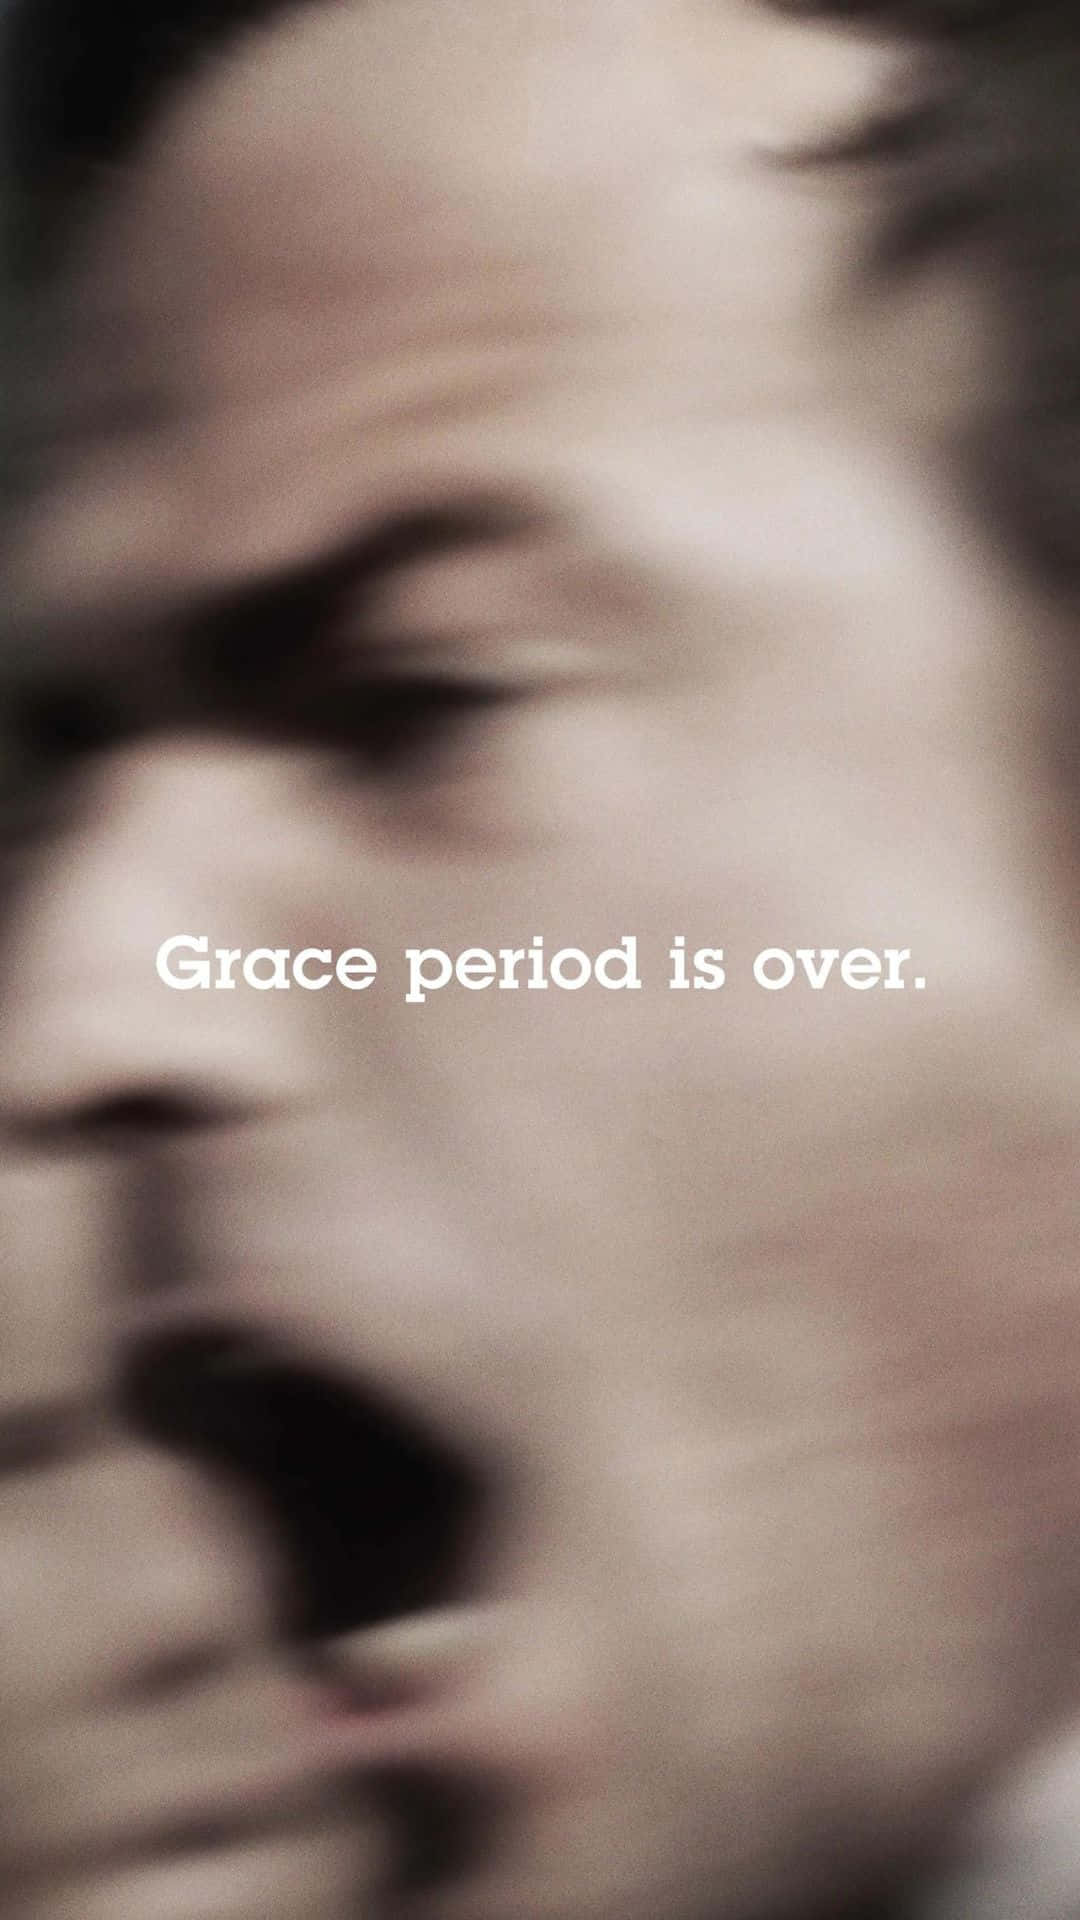 Grace Period Over Blurry Face Wallpaper